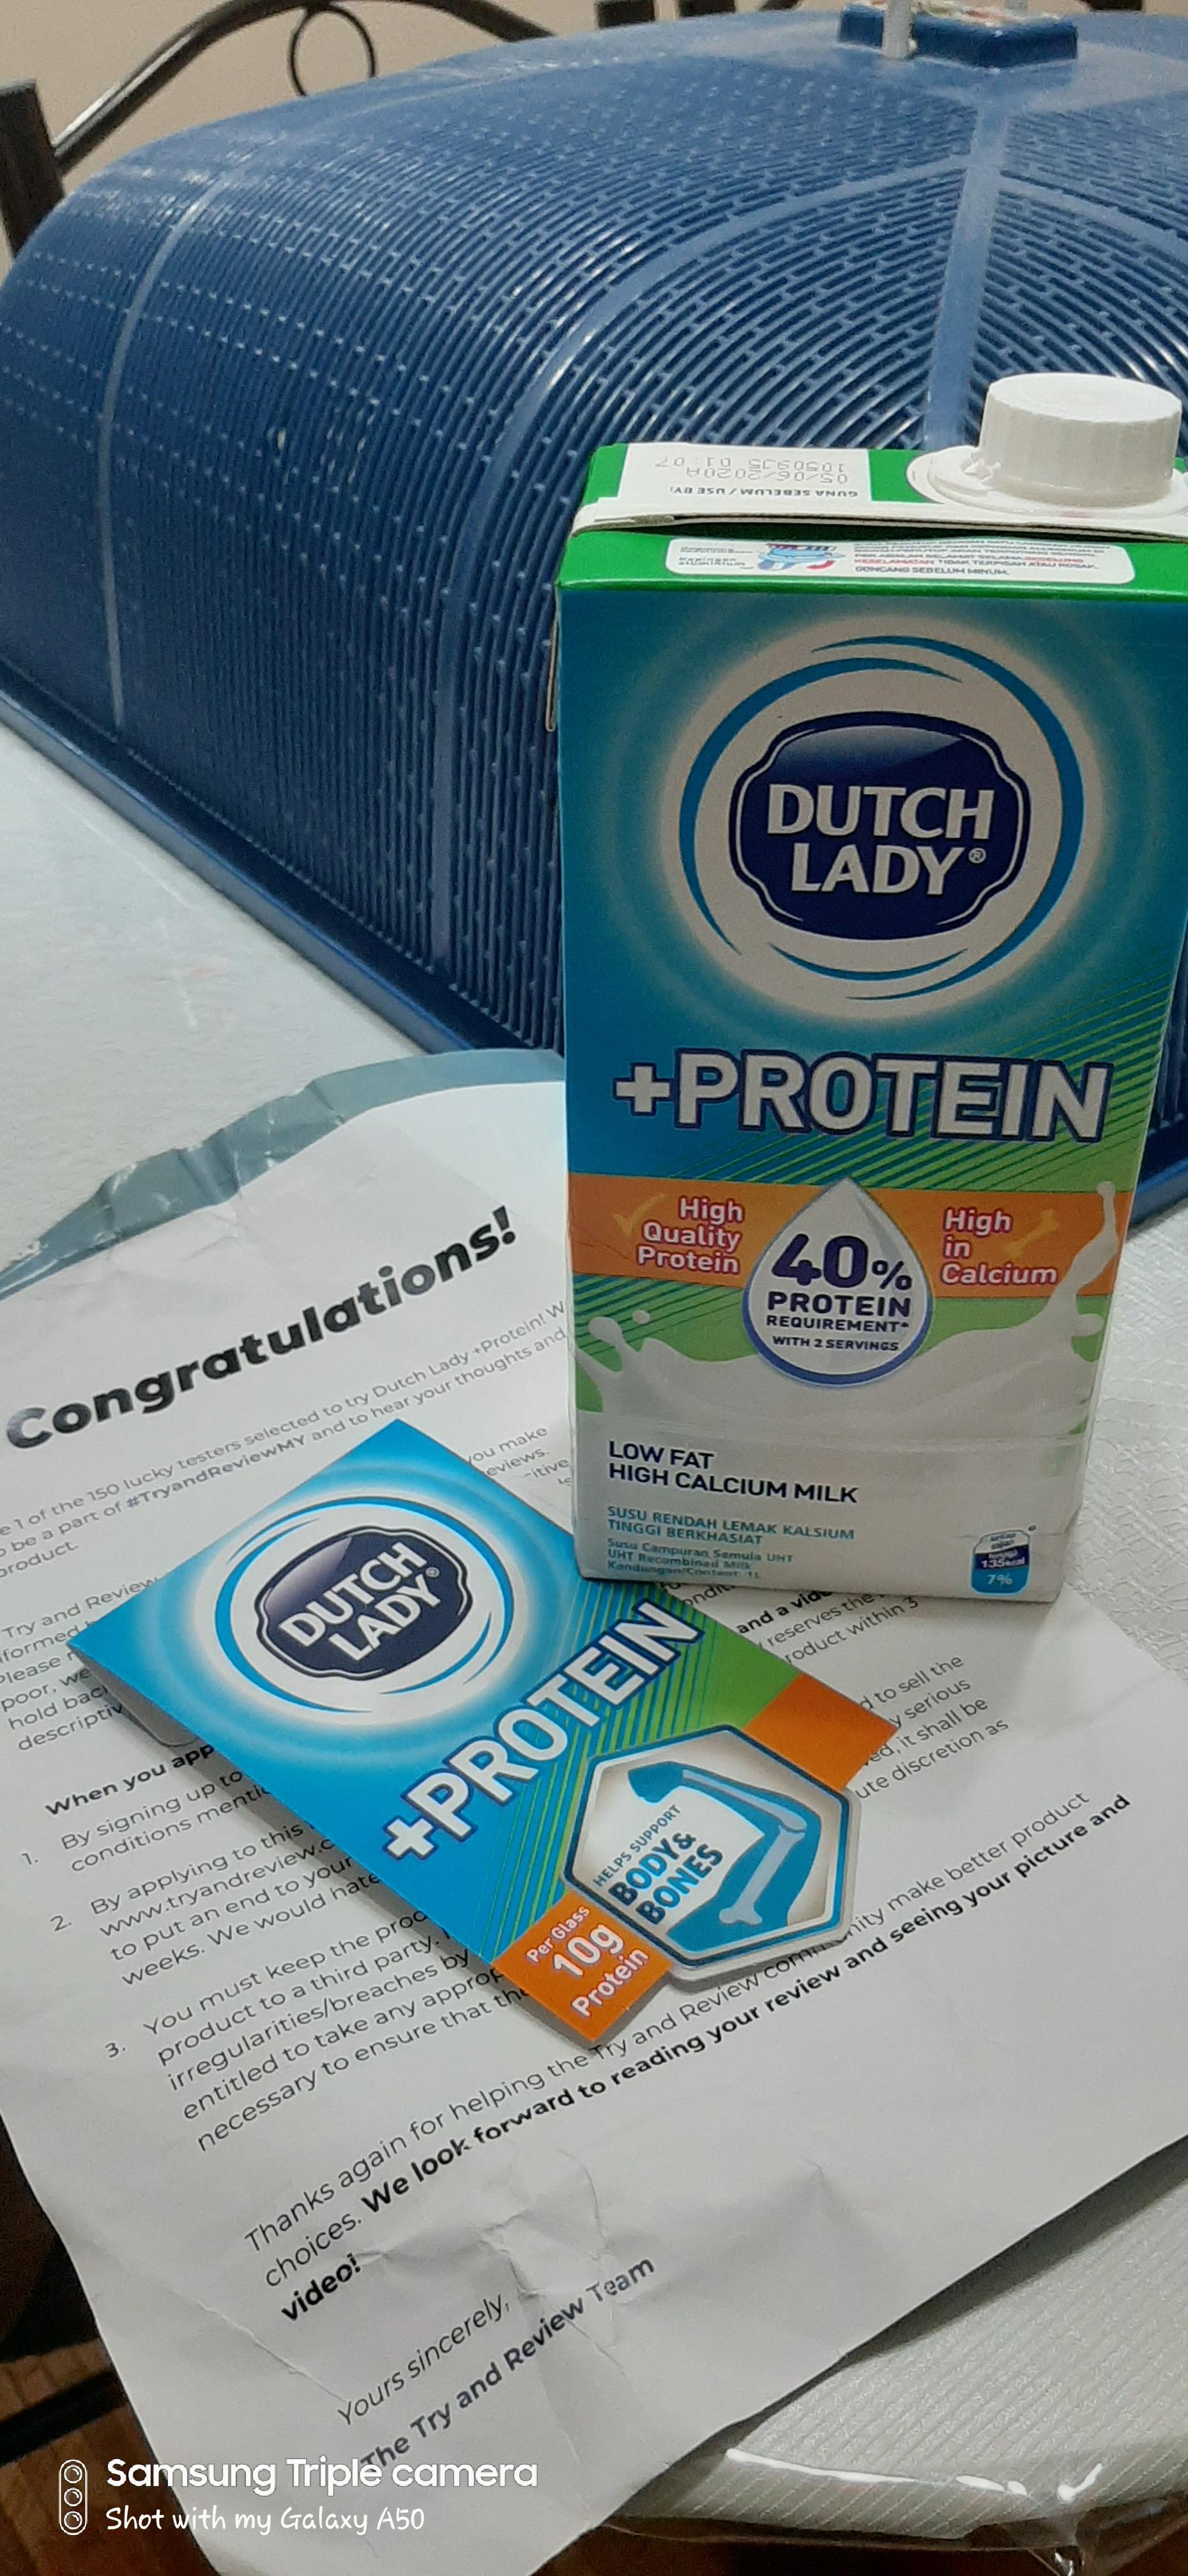 Dutch lady +protein milk by Dutch lady review Dairy & cheese